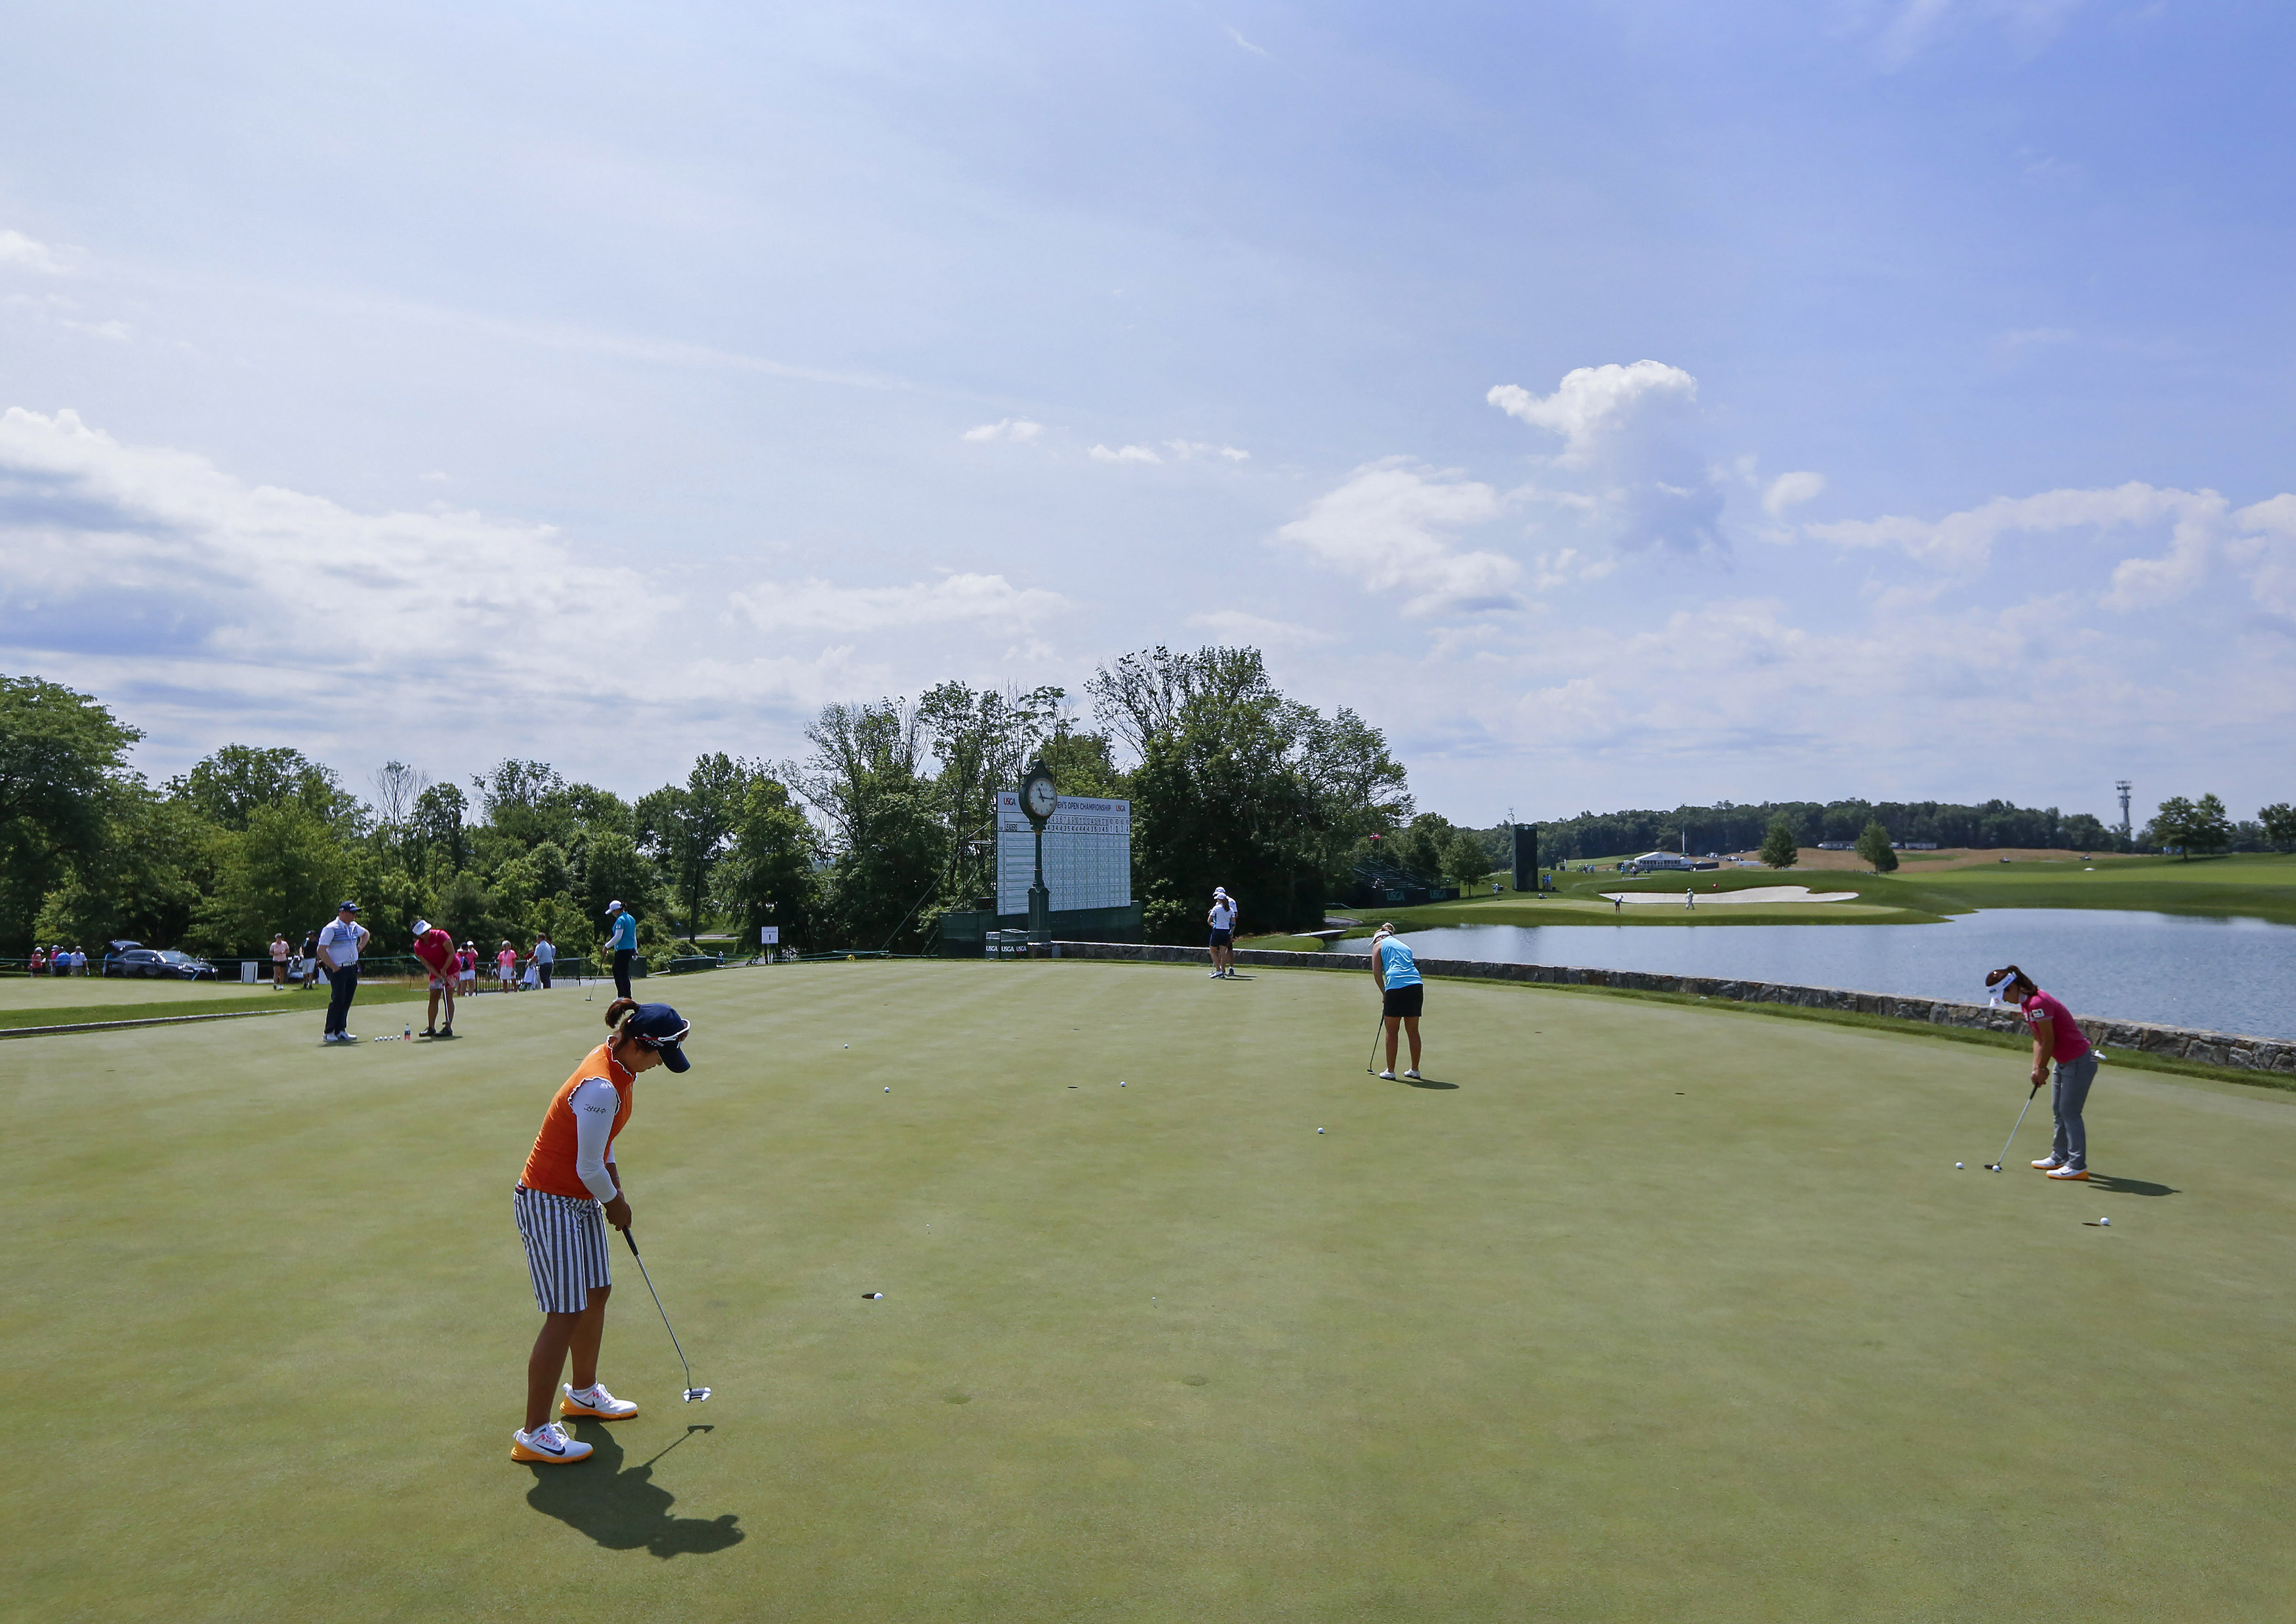 Golfers putt during a practice round at Trump National Golf Club in Bedminster, New Jersey, as it prepares to host the 2017 Women's U.S. Open. Photo courtesy of Andrew Mills, NJ Advance Media.